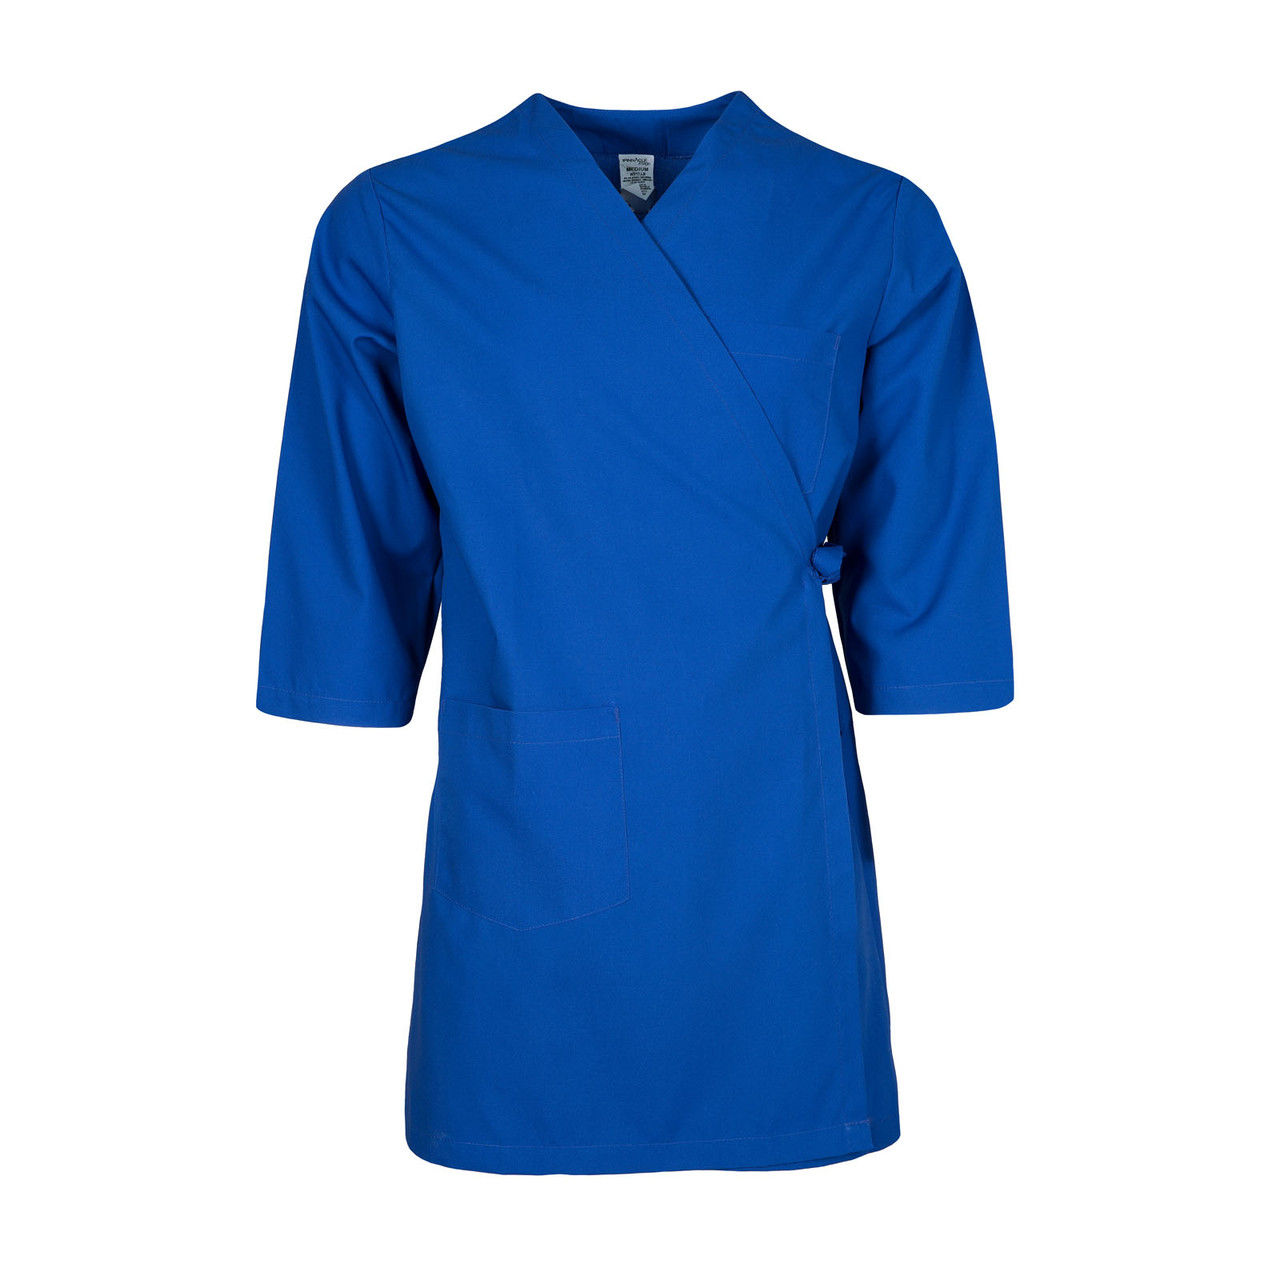 What is the design of the Royal Blue Wraparound Smock Gown with Pockets?